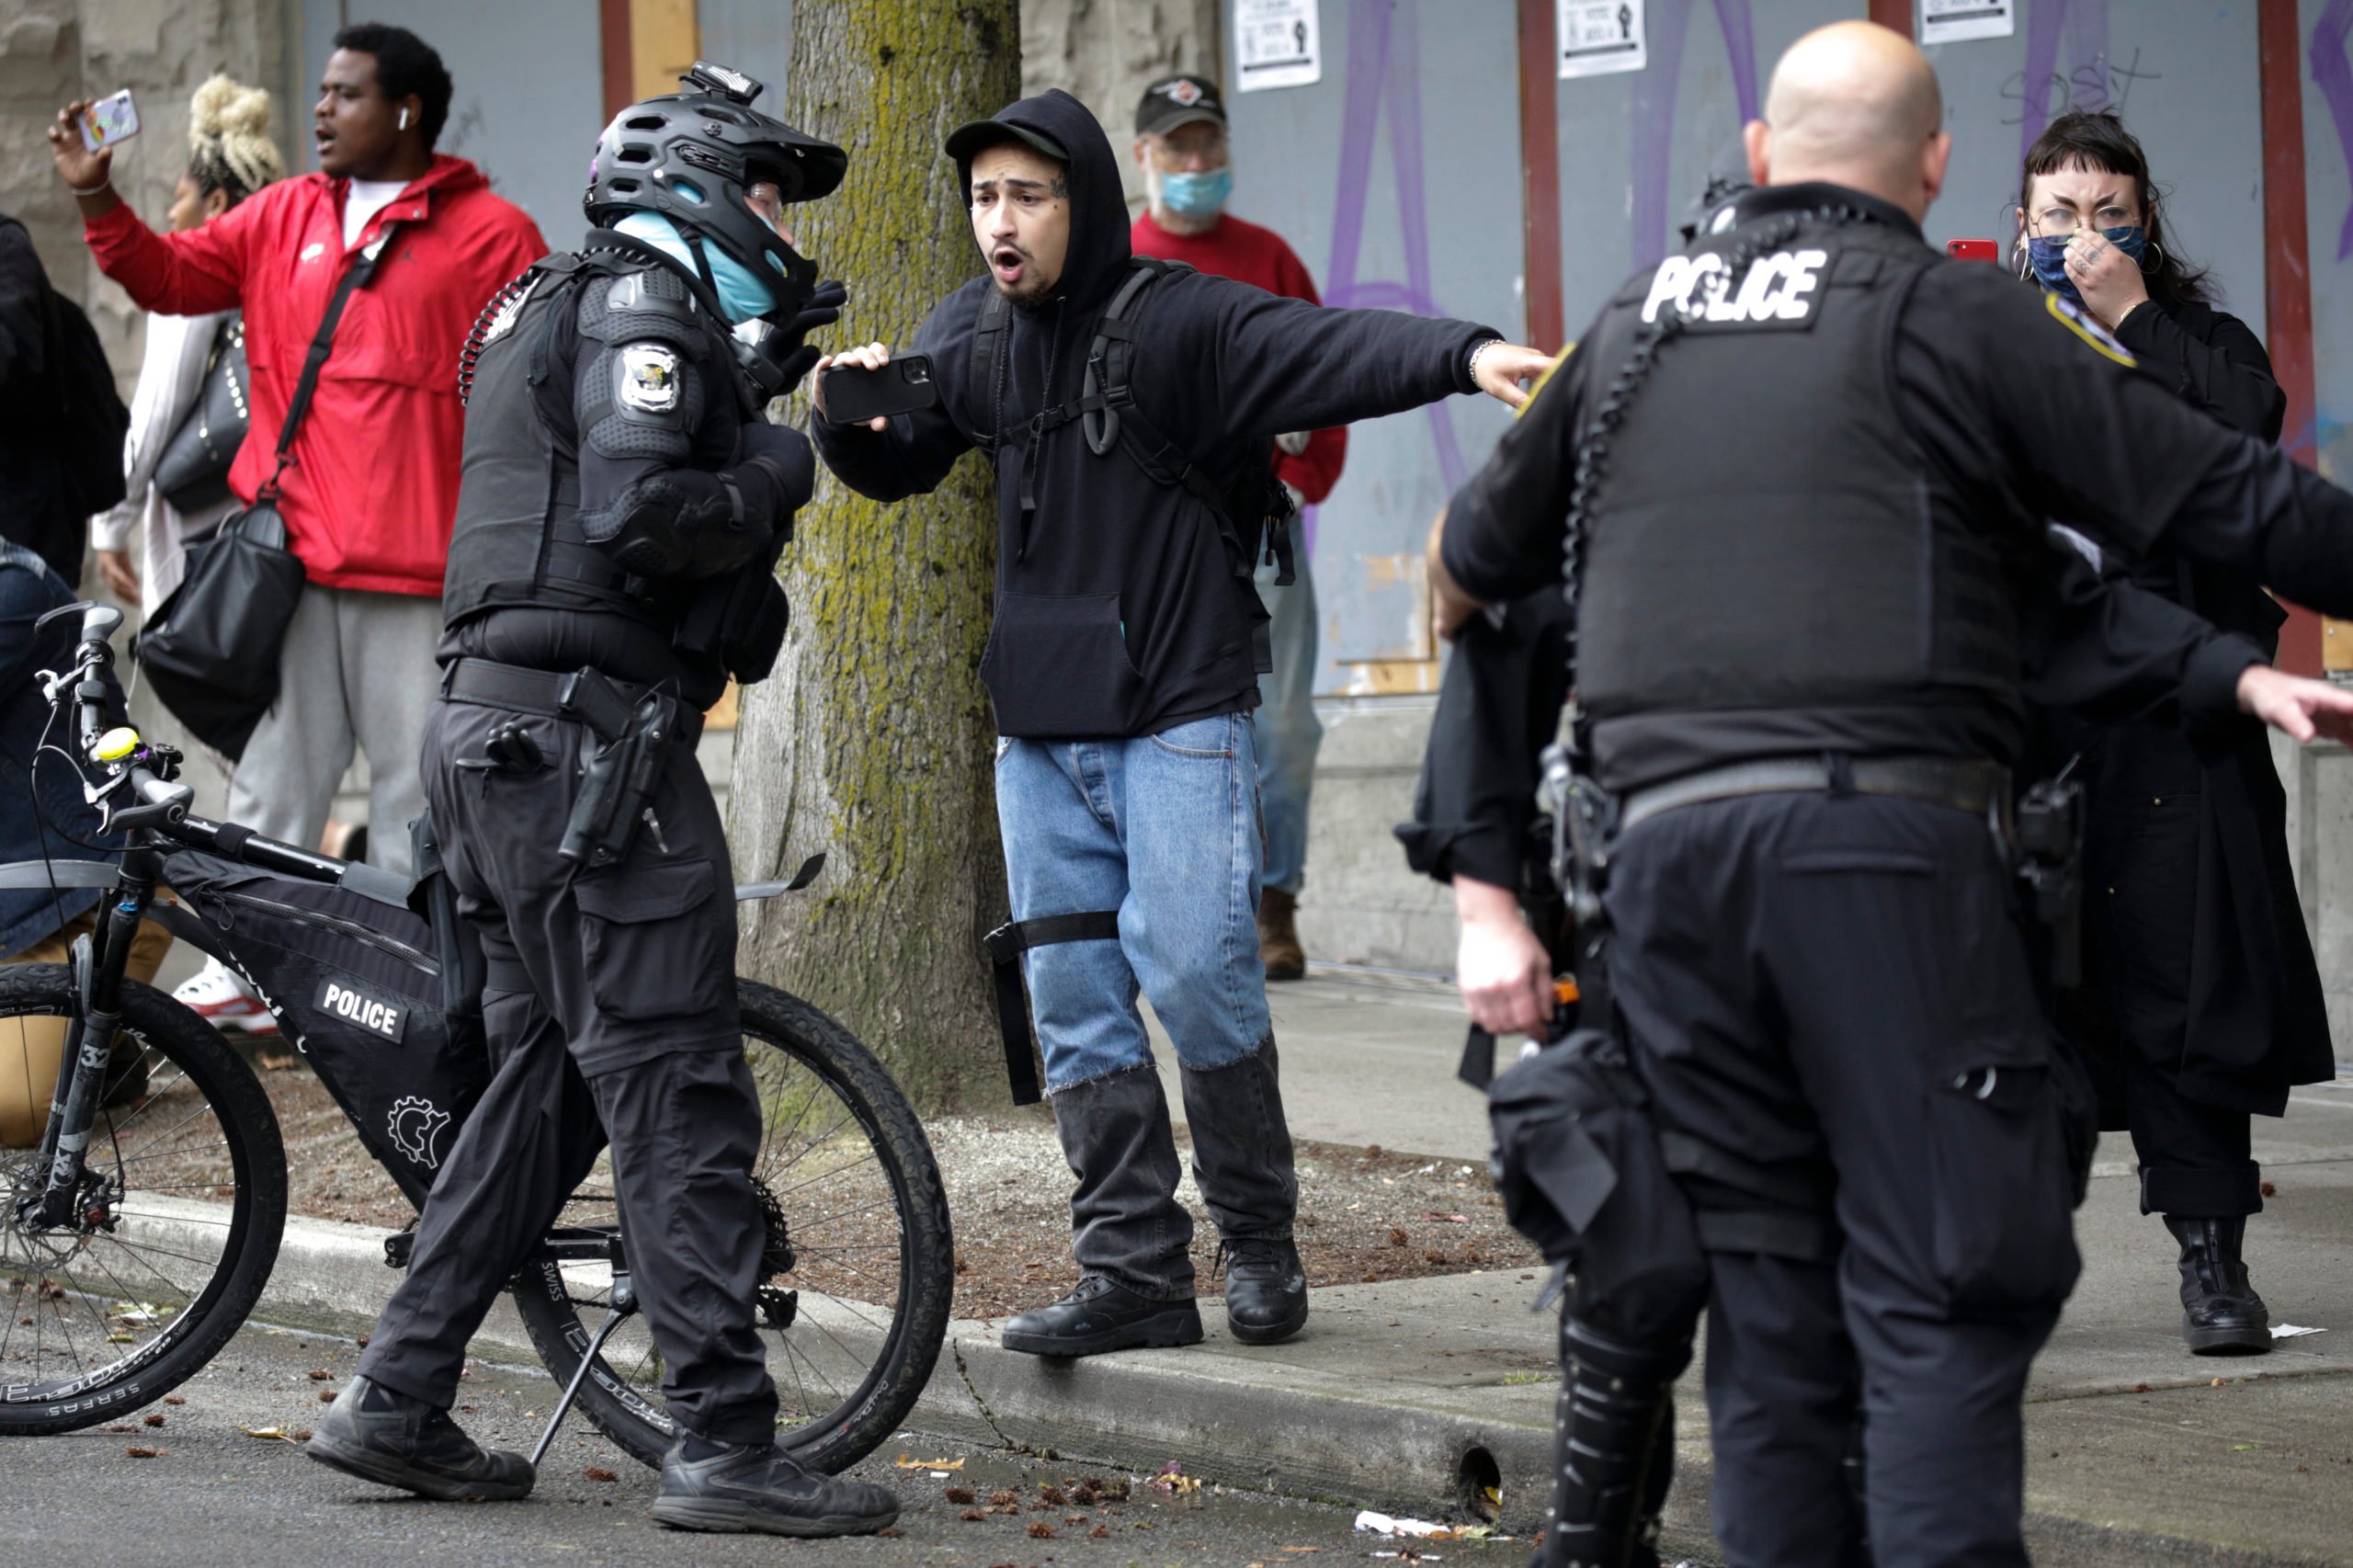 A man yells at Seattle Police as they arrest demonstrators who were blocking the intersection of East Pine Street and 11th Avenue after police cleared the Capitol Hill Occupied Protest (CHOP) and retook the department's East Precinct in Seattle, Washington on July 1, 2020. (Photo by Jason Redmond / AFP) (Photo by JASON REDMOND/AFP via Getty Images)